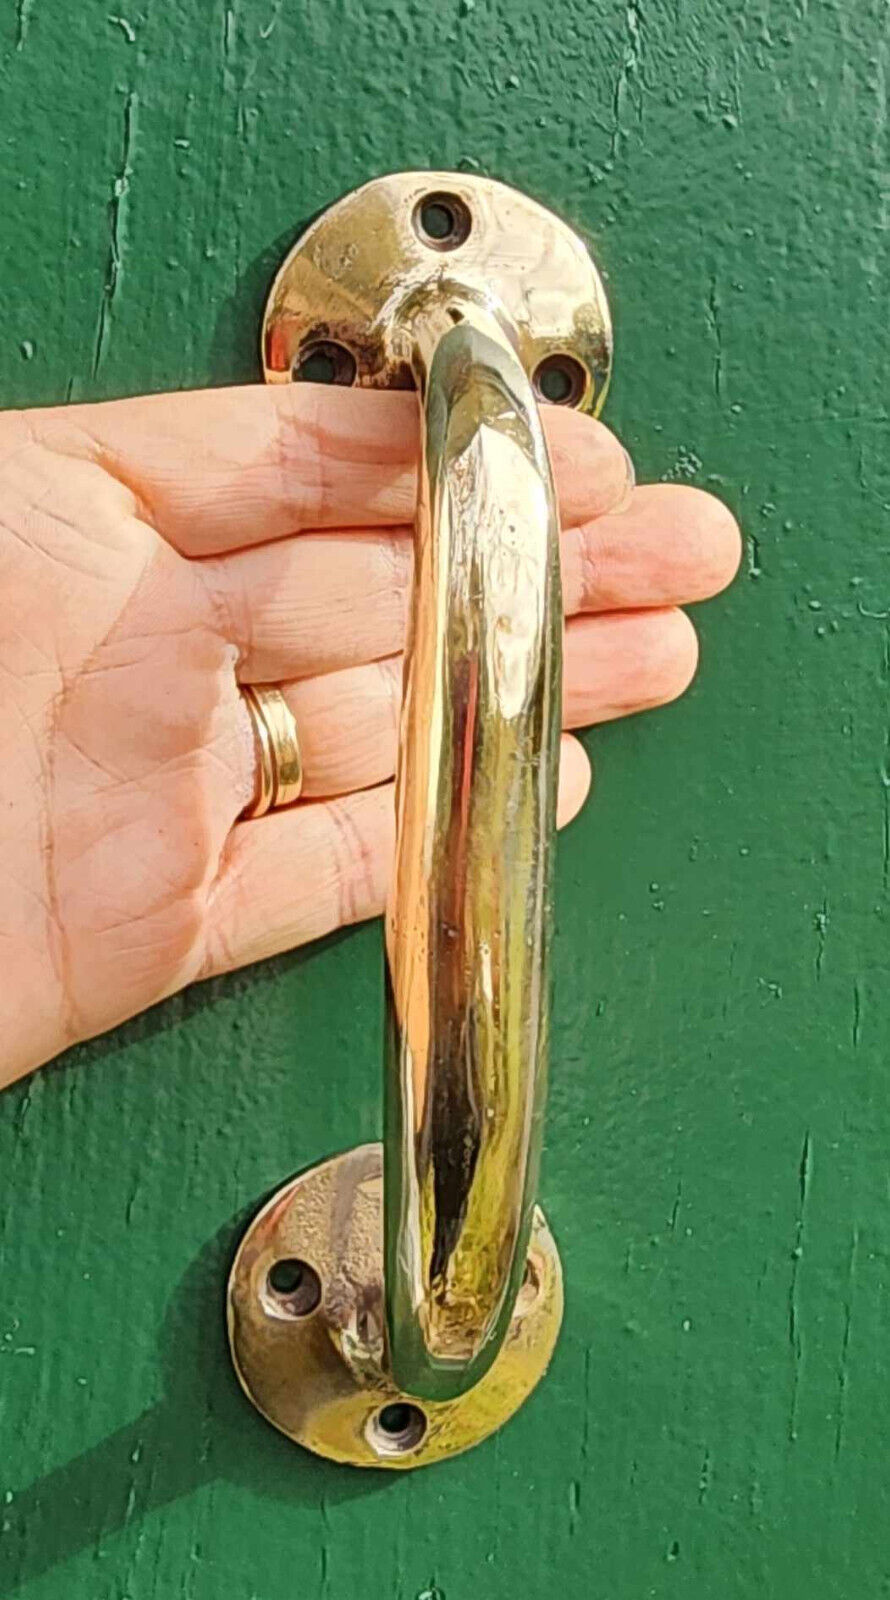 POLISHED Heavy Ant. Style Solid Brass LARGE Gate Cabinet Door Handle 7" #P23s